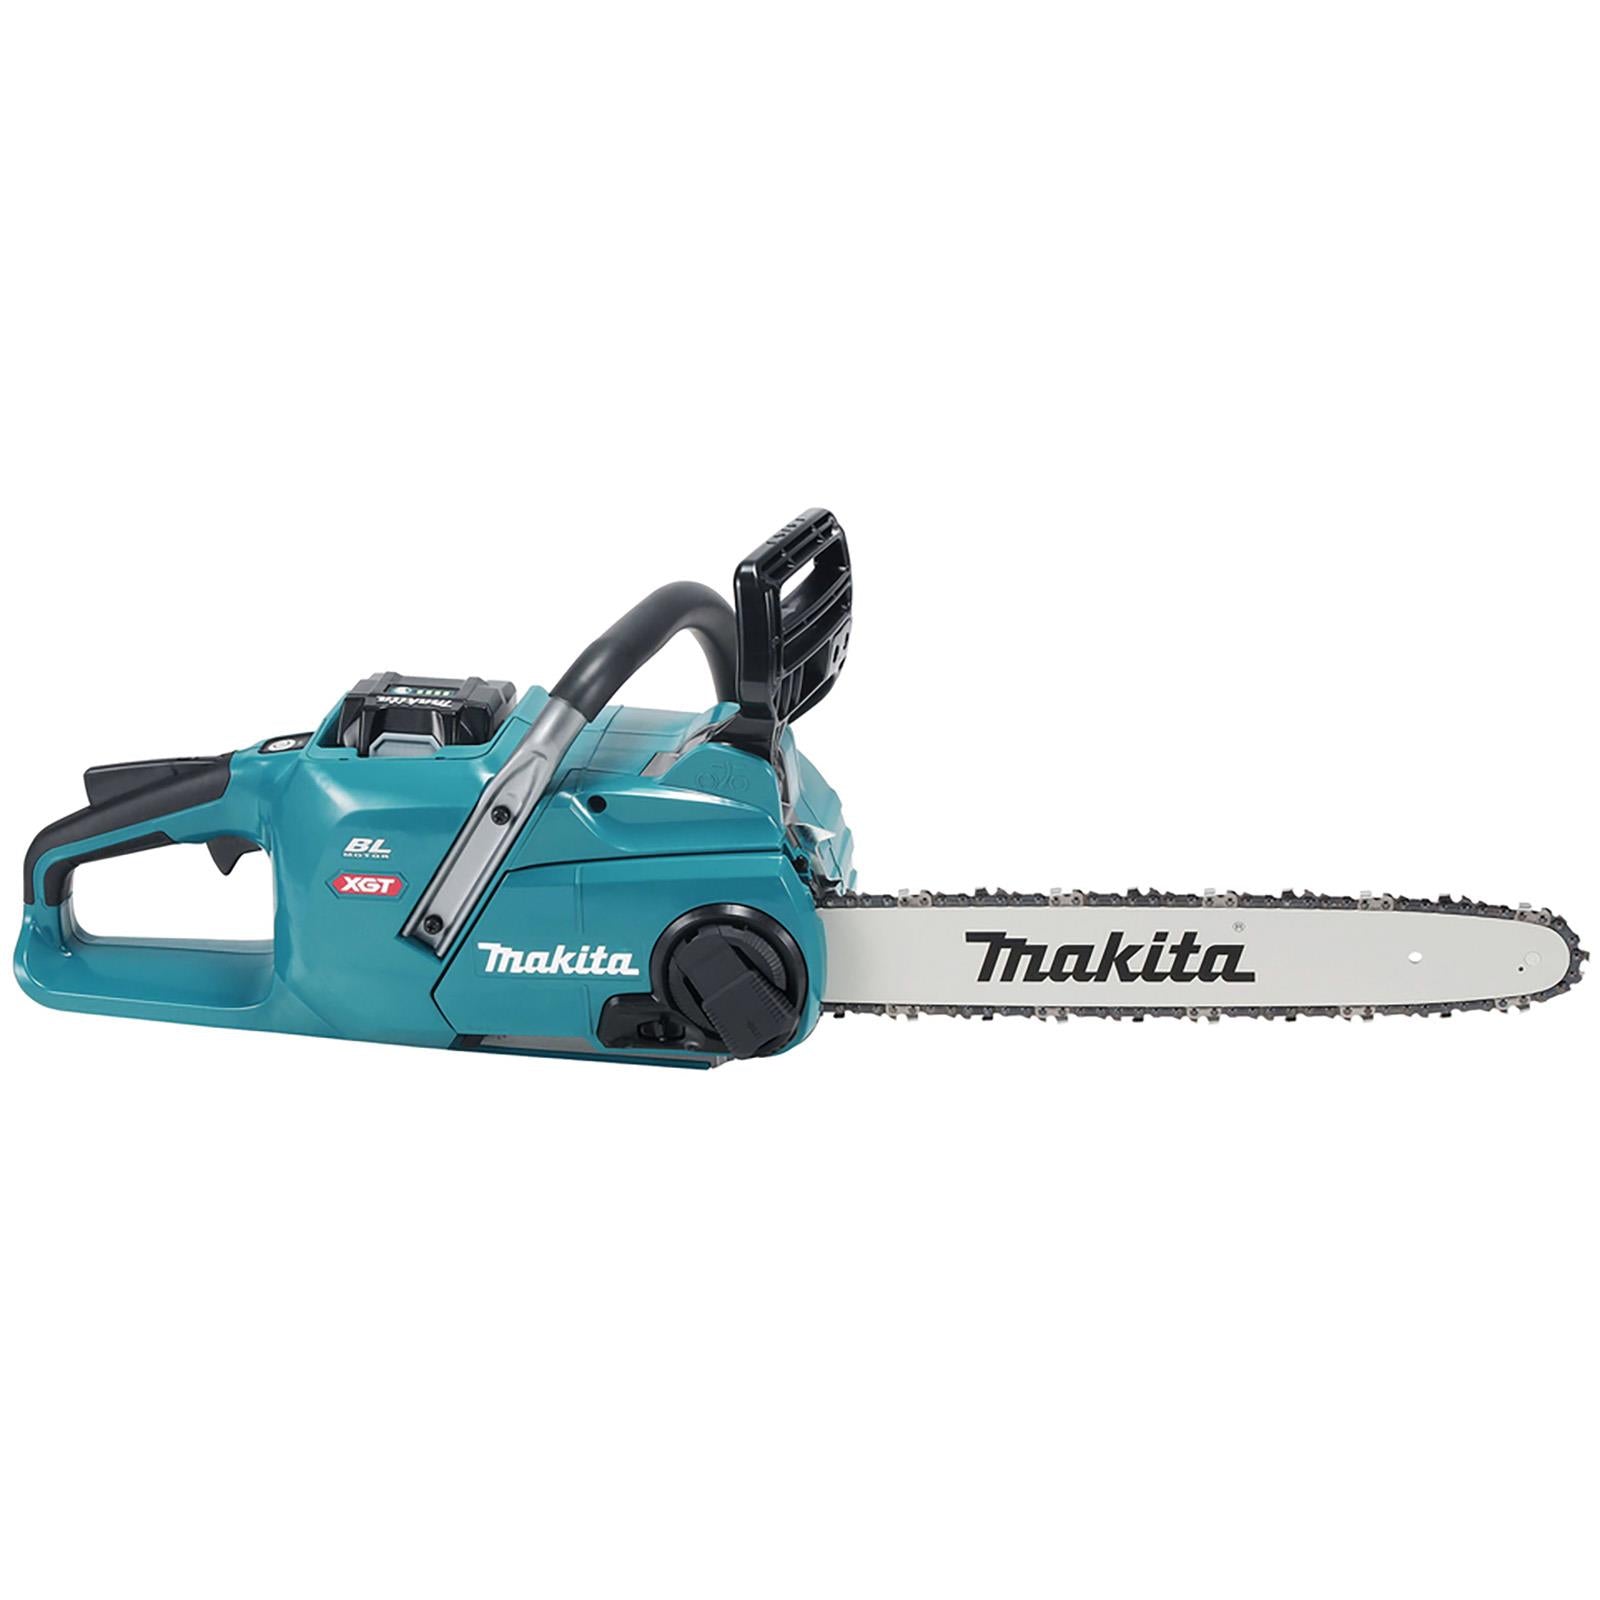 Makita Chainsaw Kit 40cm Heavy Duty 16" 40V XGT Brushless Cordless 2 x 5Ah Battery and Rapid Charger Garden Tree Cutting Pruning UC016GT201